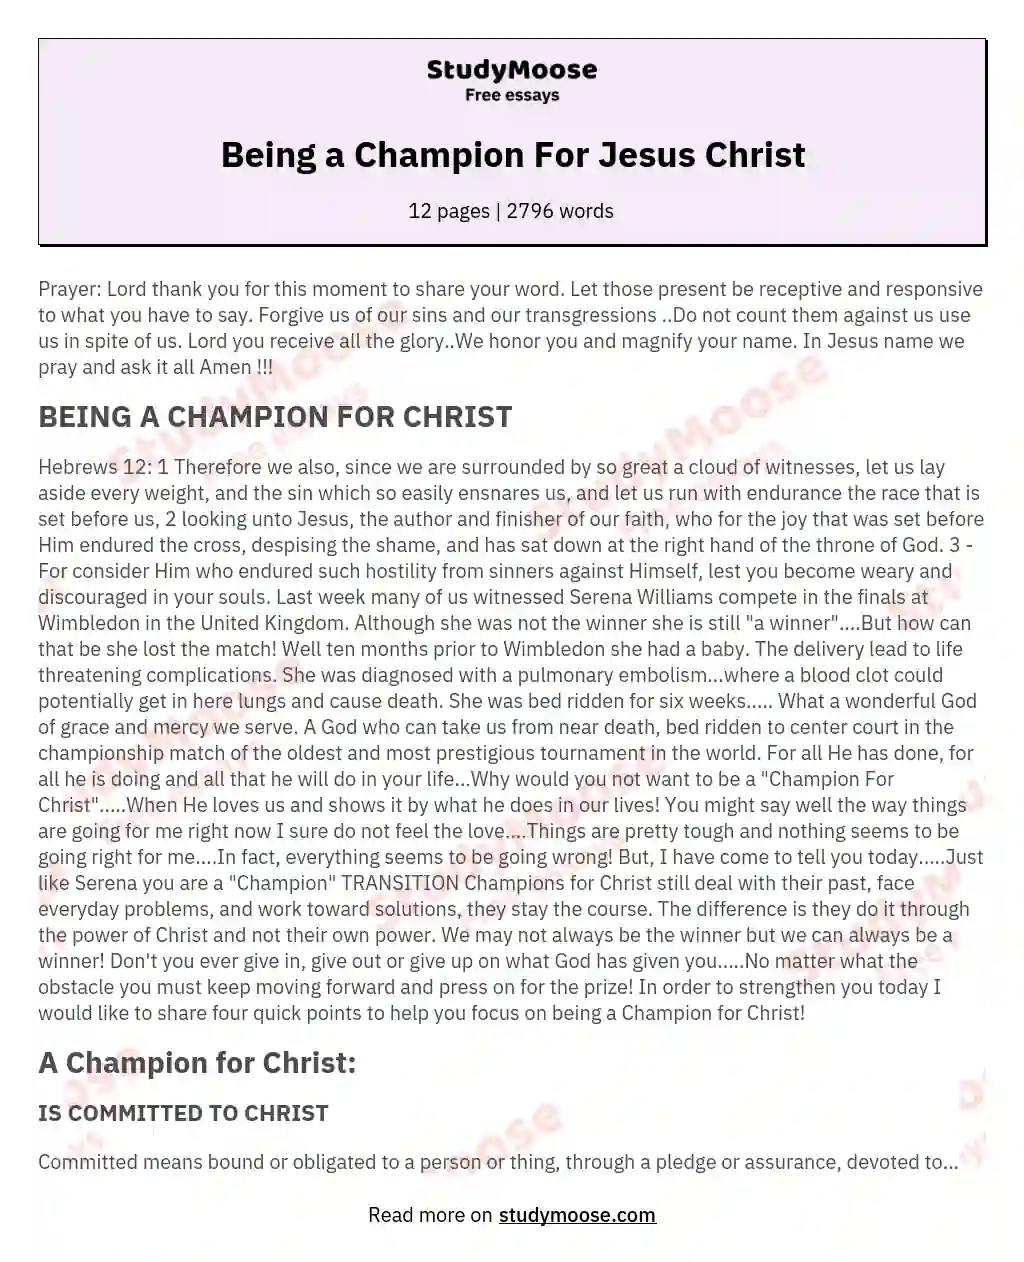 Being a Champion For Jesus Christ essay